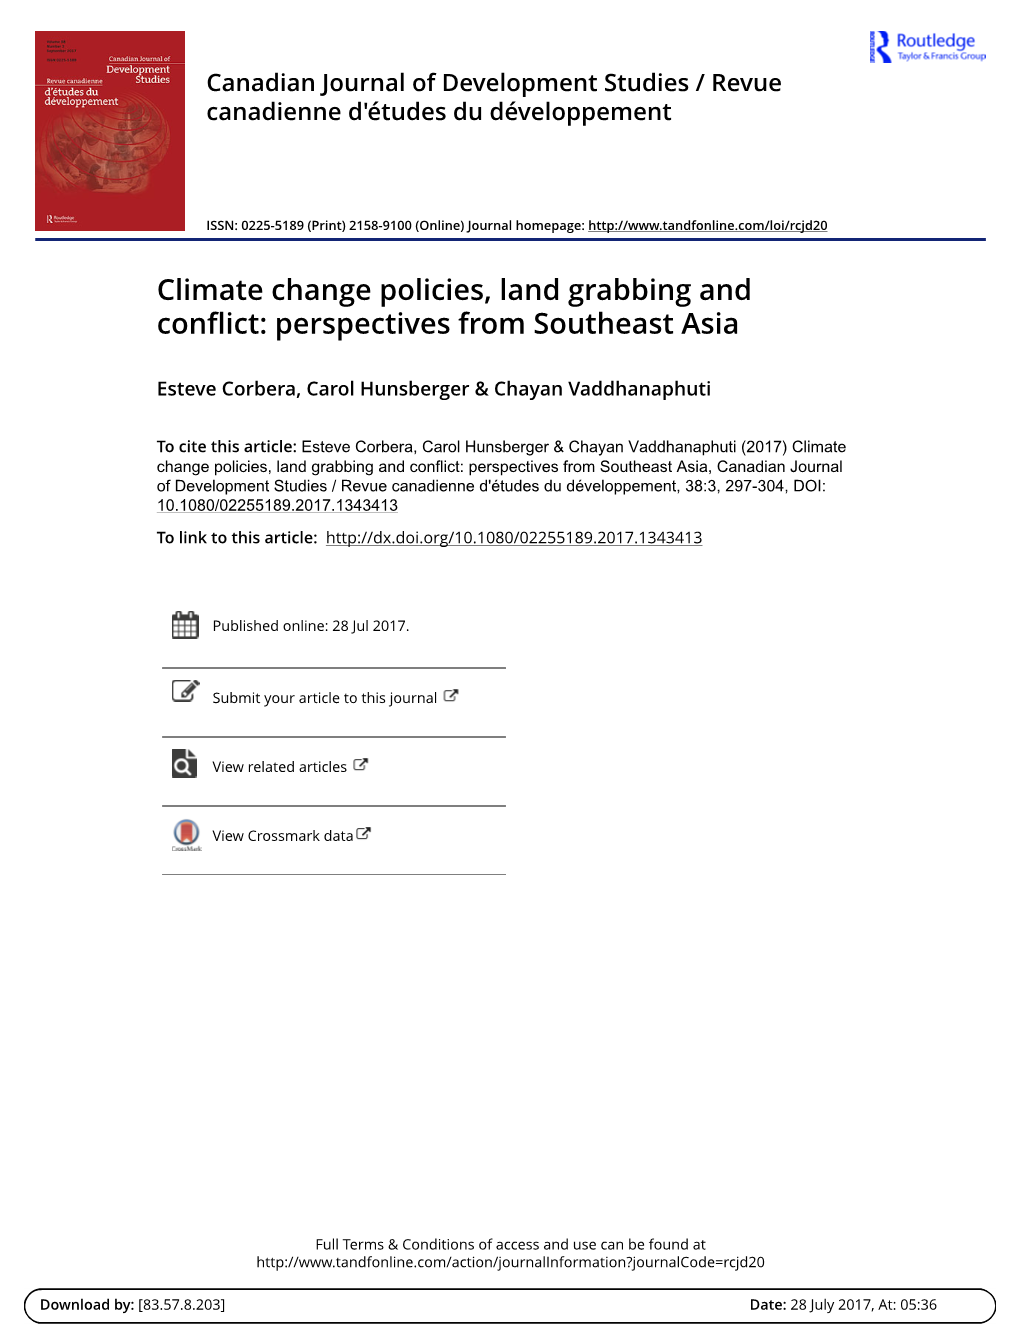 Climate Change Policies, Land Grabbing and Conflict: Perspectives from Southeast Asia